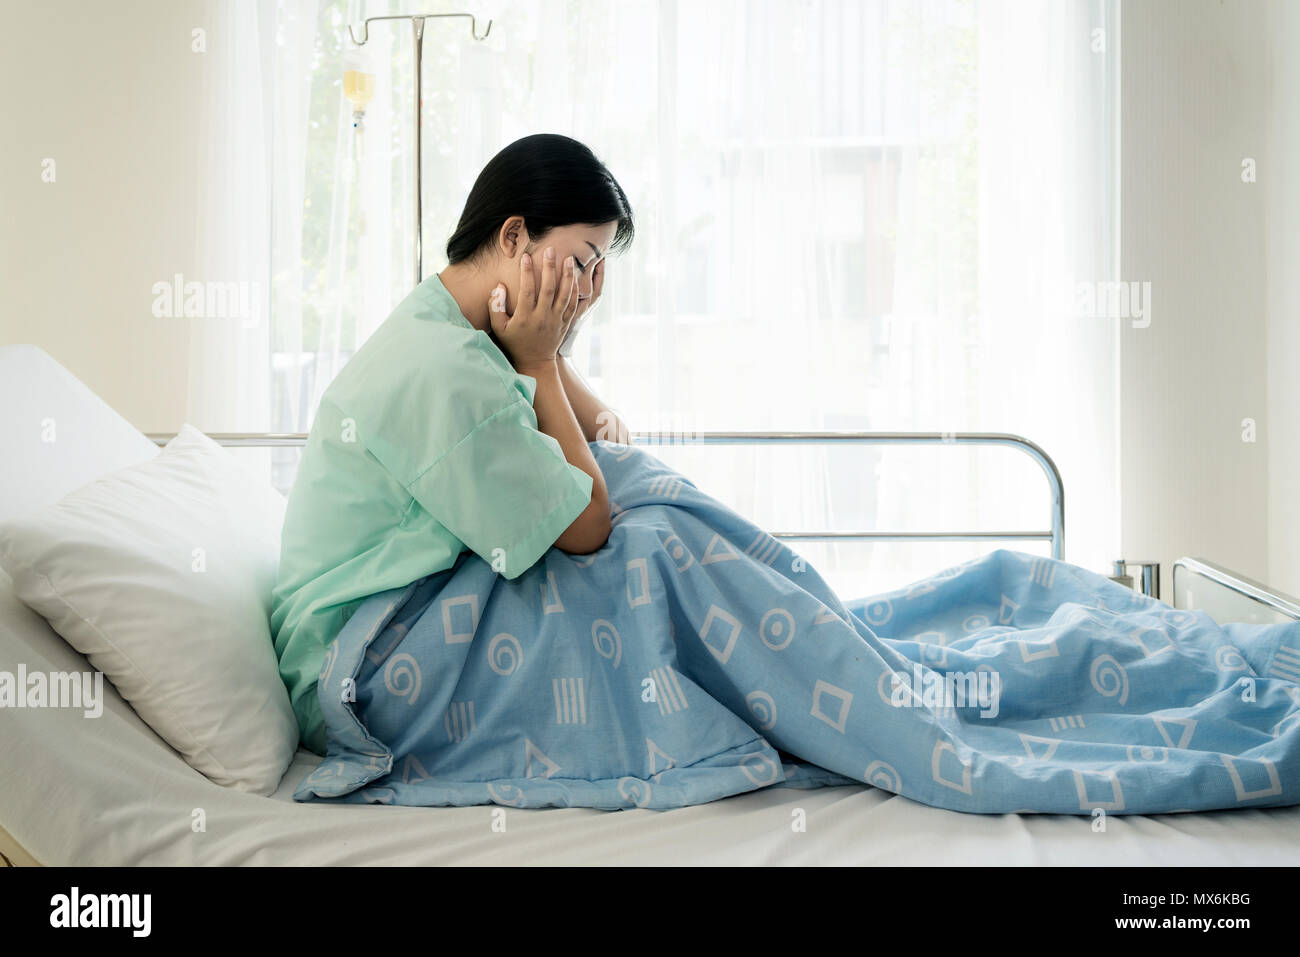 Asian young woman patient lying at hospital bed feeling sad and depressed worry. Disease feeling sick in health care and clinical attention concept. Stock Photo